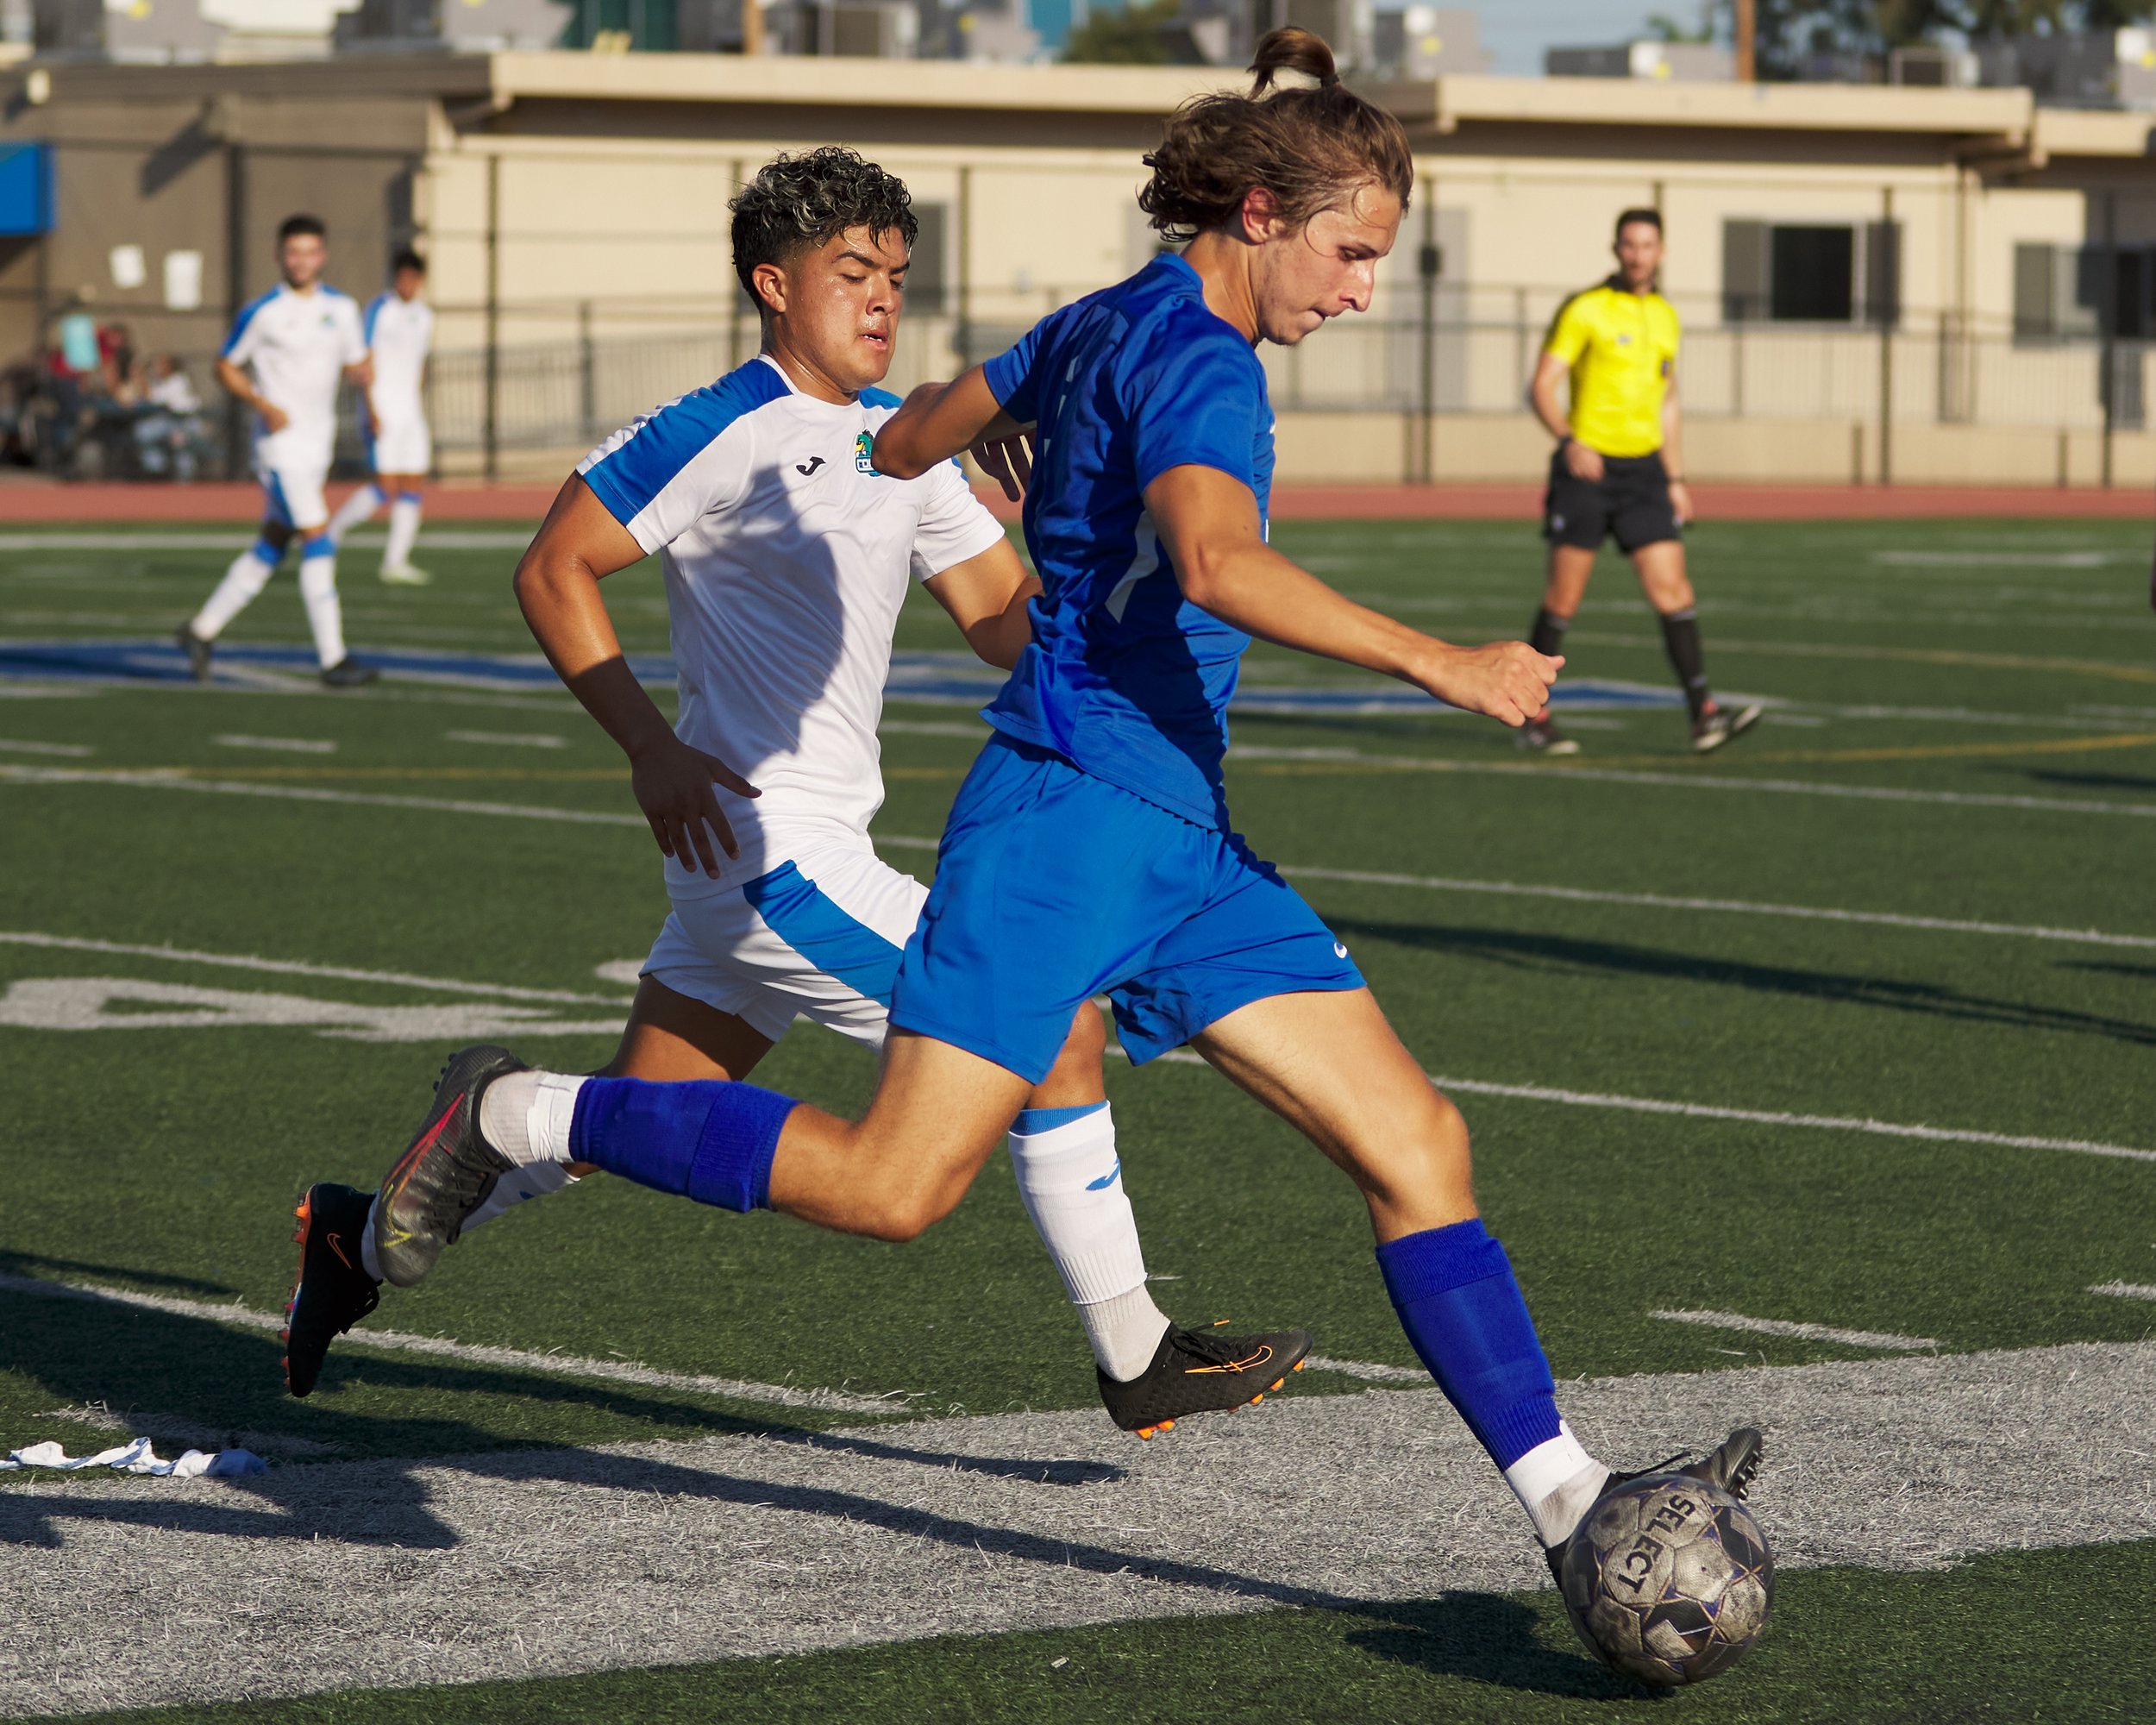  Santa Monica College Corsairs' Axel Green (right) and Oxnard College Condors' Andy Cruz (left) during the men's soccer match on Tuesday, Oct. 18, 2022, at Corsair Field in Santa Monica, Calif. The Corsairs lost 0-3. (Nicholas McCall | The Corsair) 